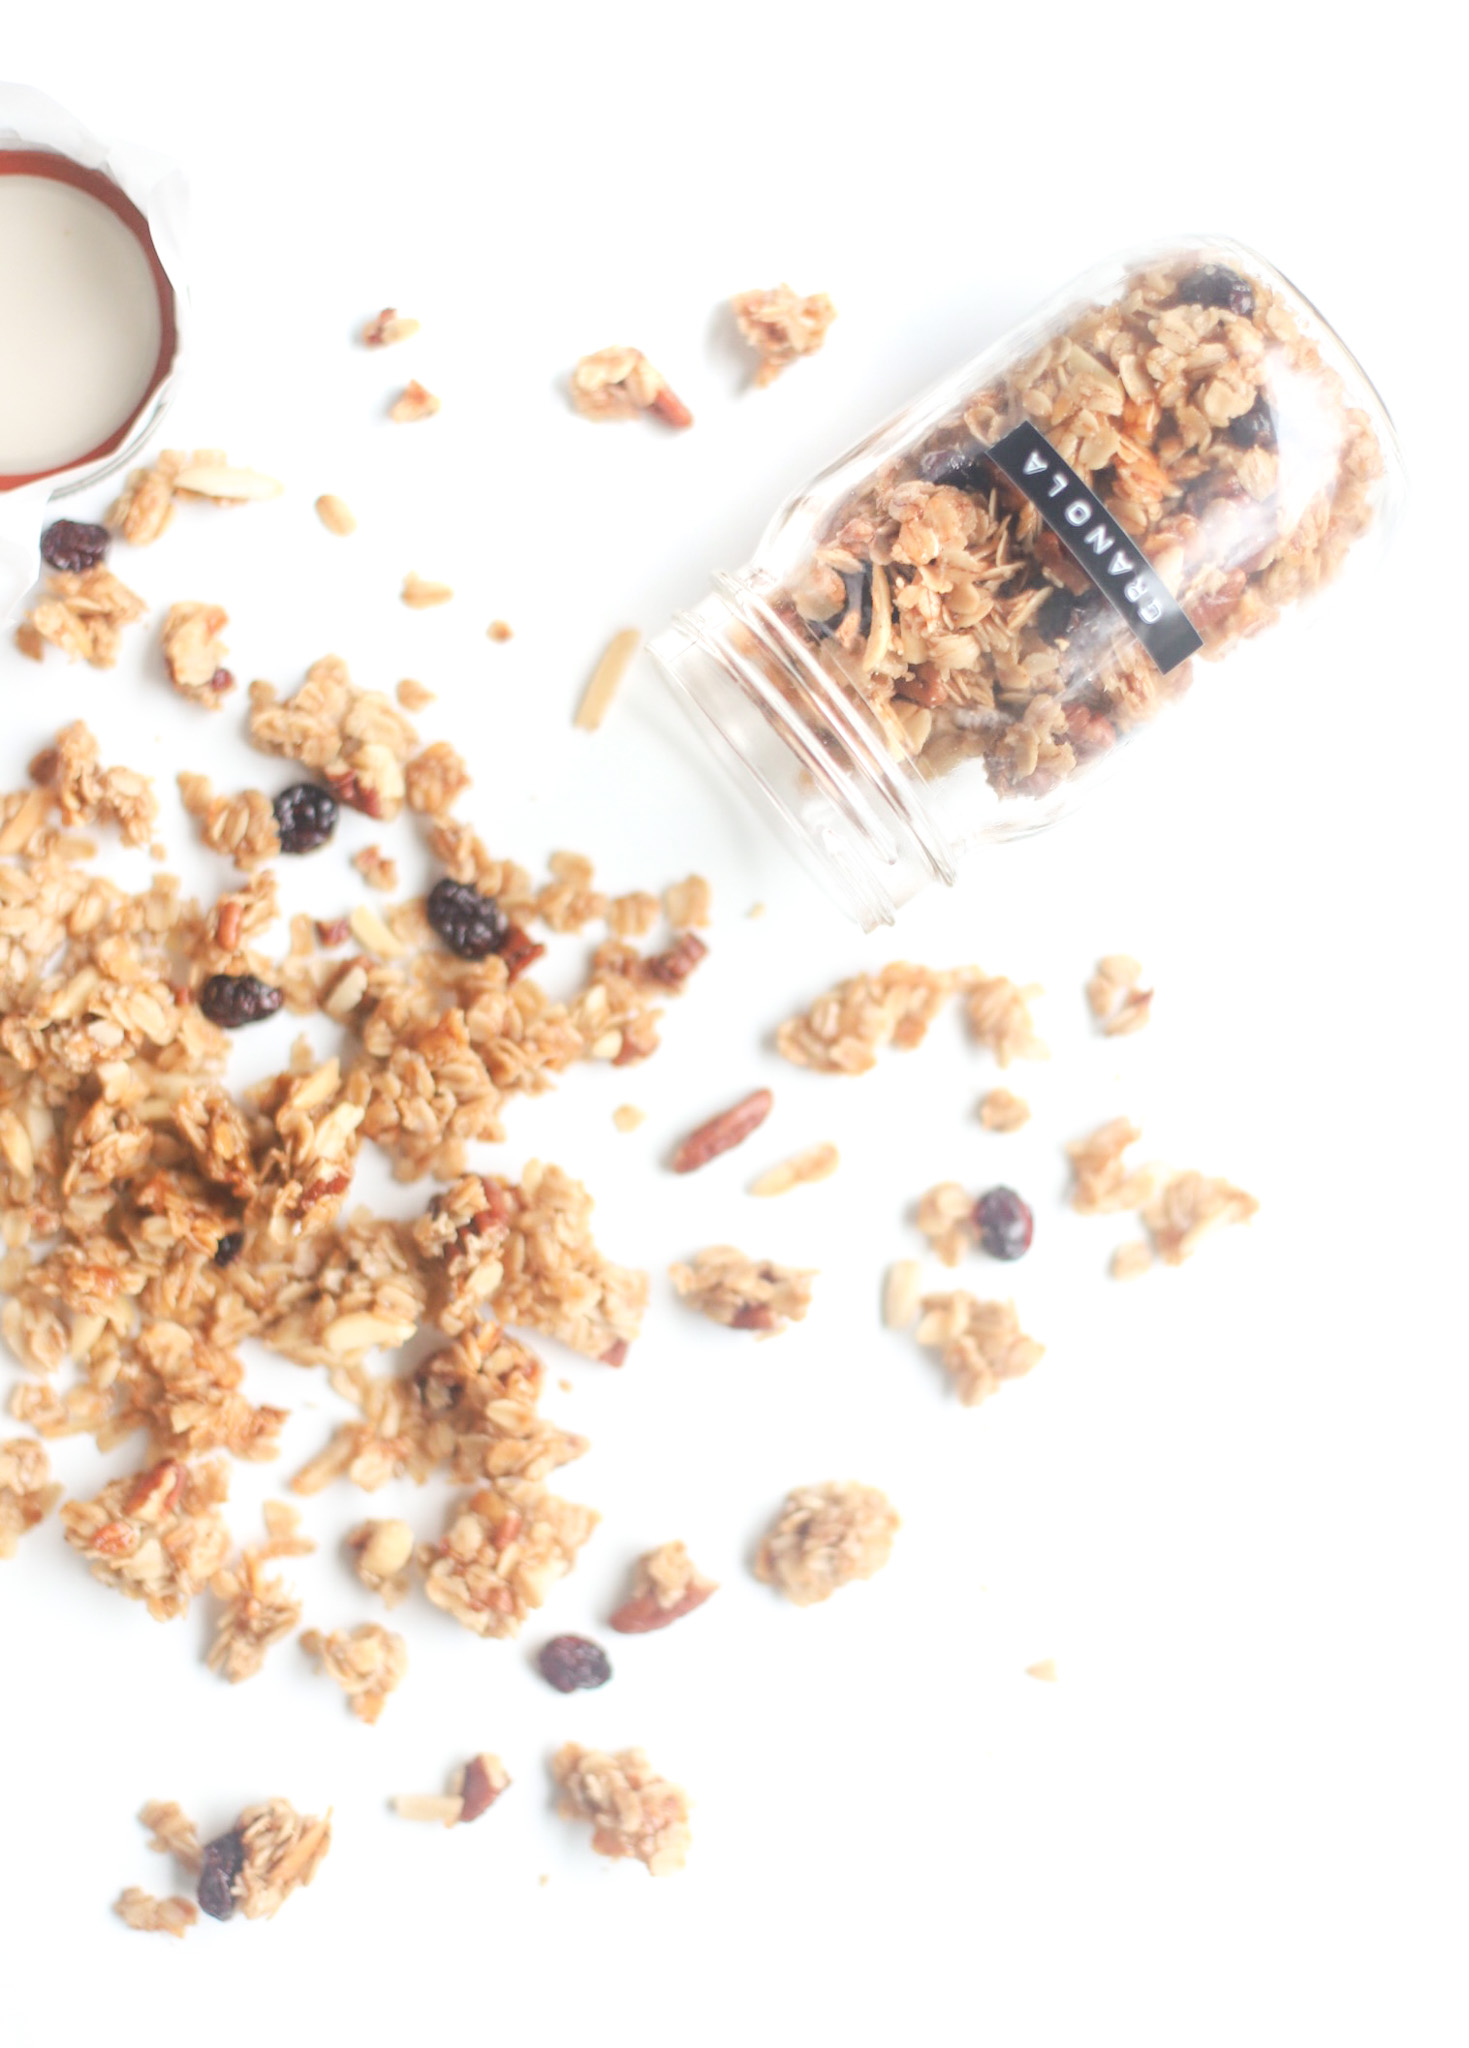 Homemade Classic Granola - Our Favorite Chewy, Cookie-Like Go-To Granola - Add in Your Favorite Nuts, Seeds, and Dried Fruit to Make this granola recipe totally customized! | @glitterinclexi | GLITTERINC.COM